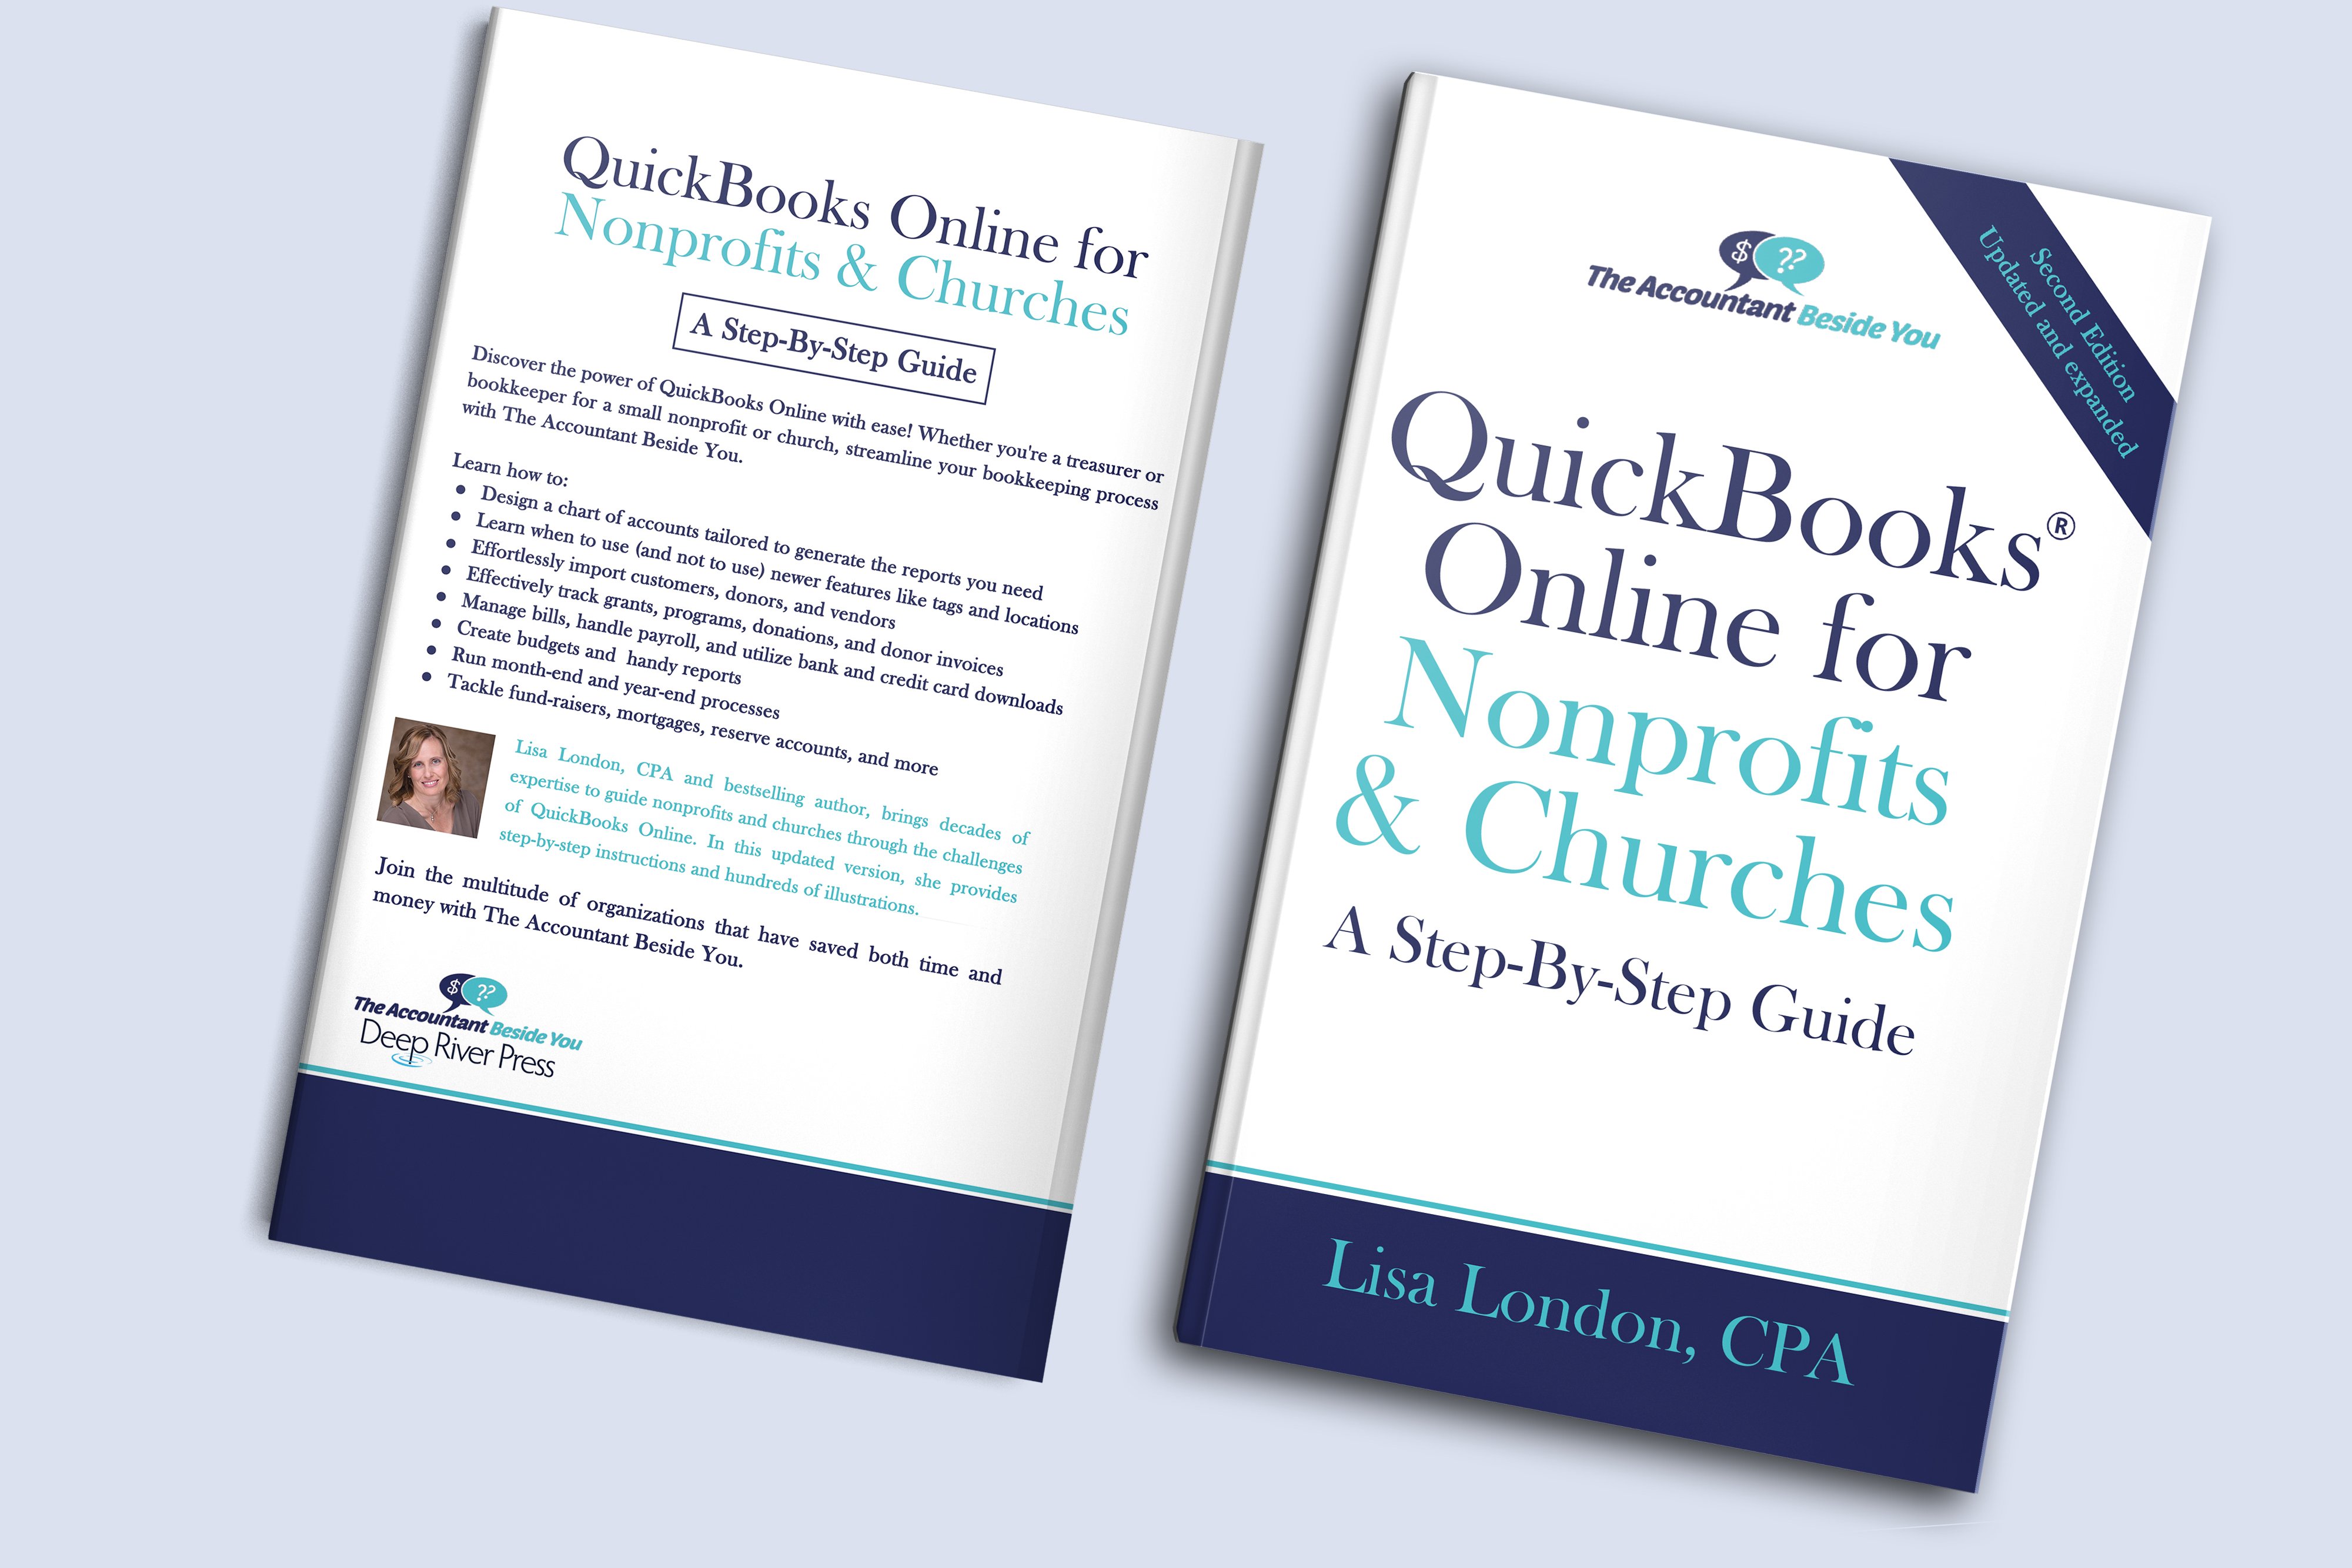 QuickBooks Online for Nonprofits Accounting Guide 2nd Edition (Paperback)